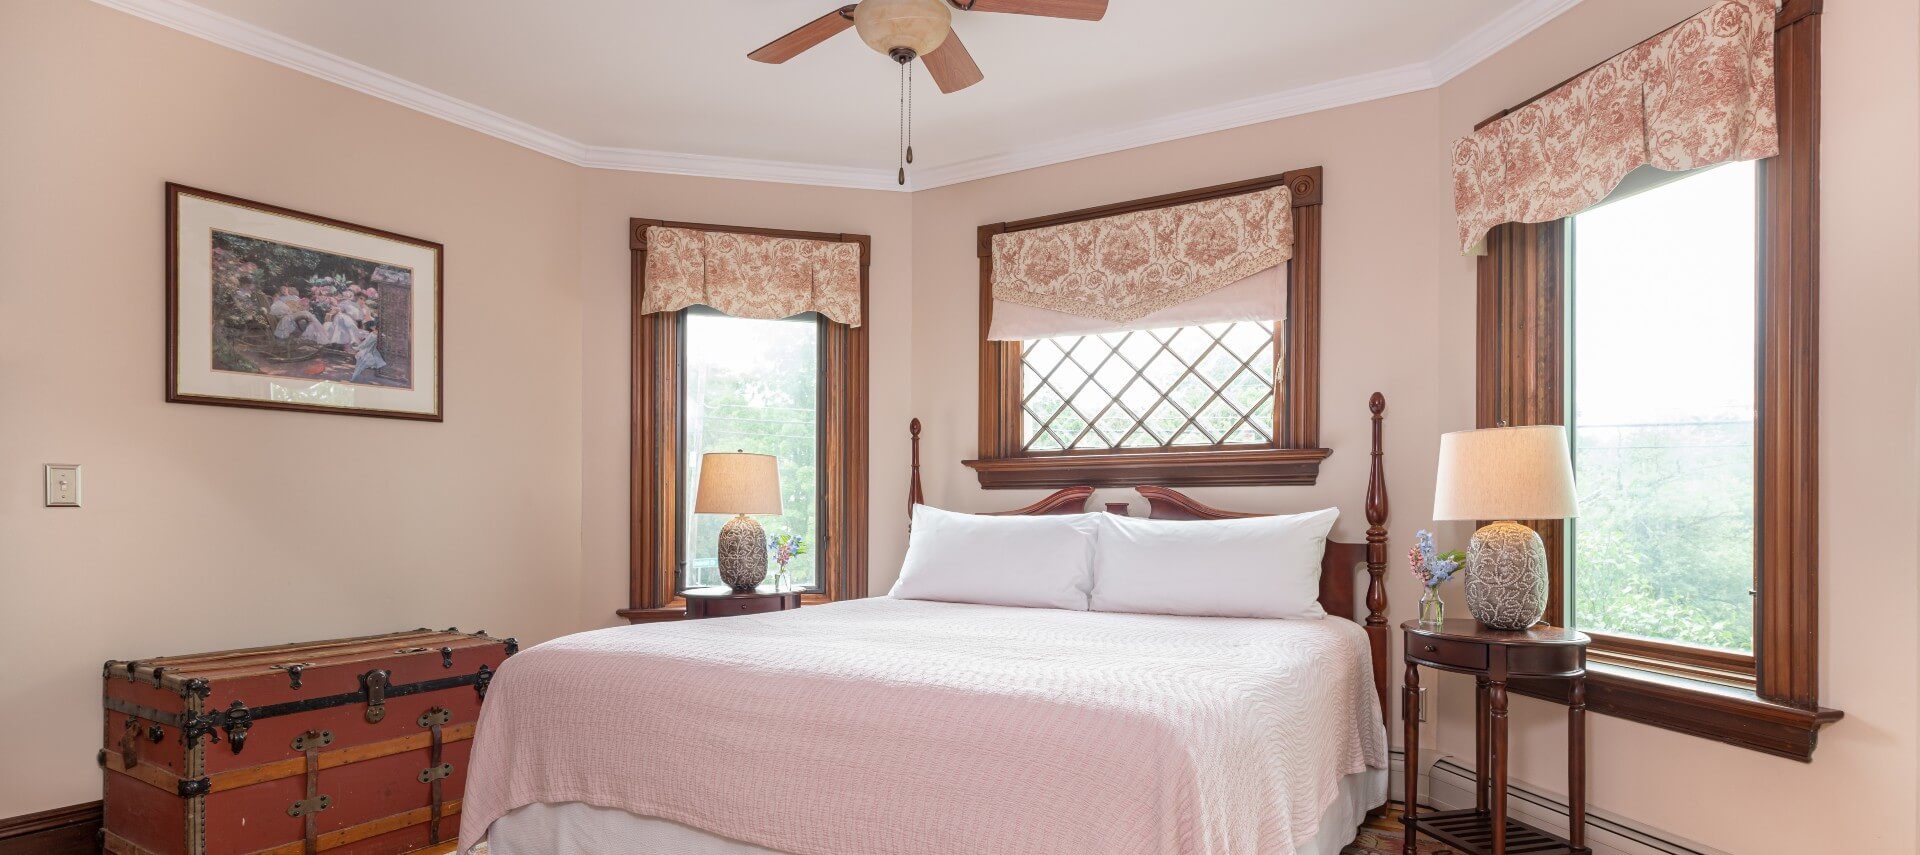 Elegant and bright bedroom with a king bed, side tables with lamps and bright windows with floral valences